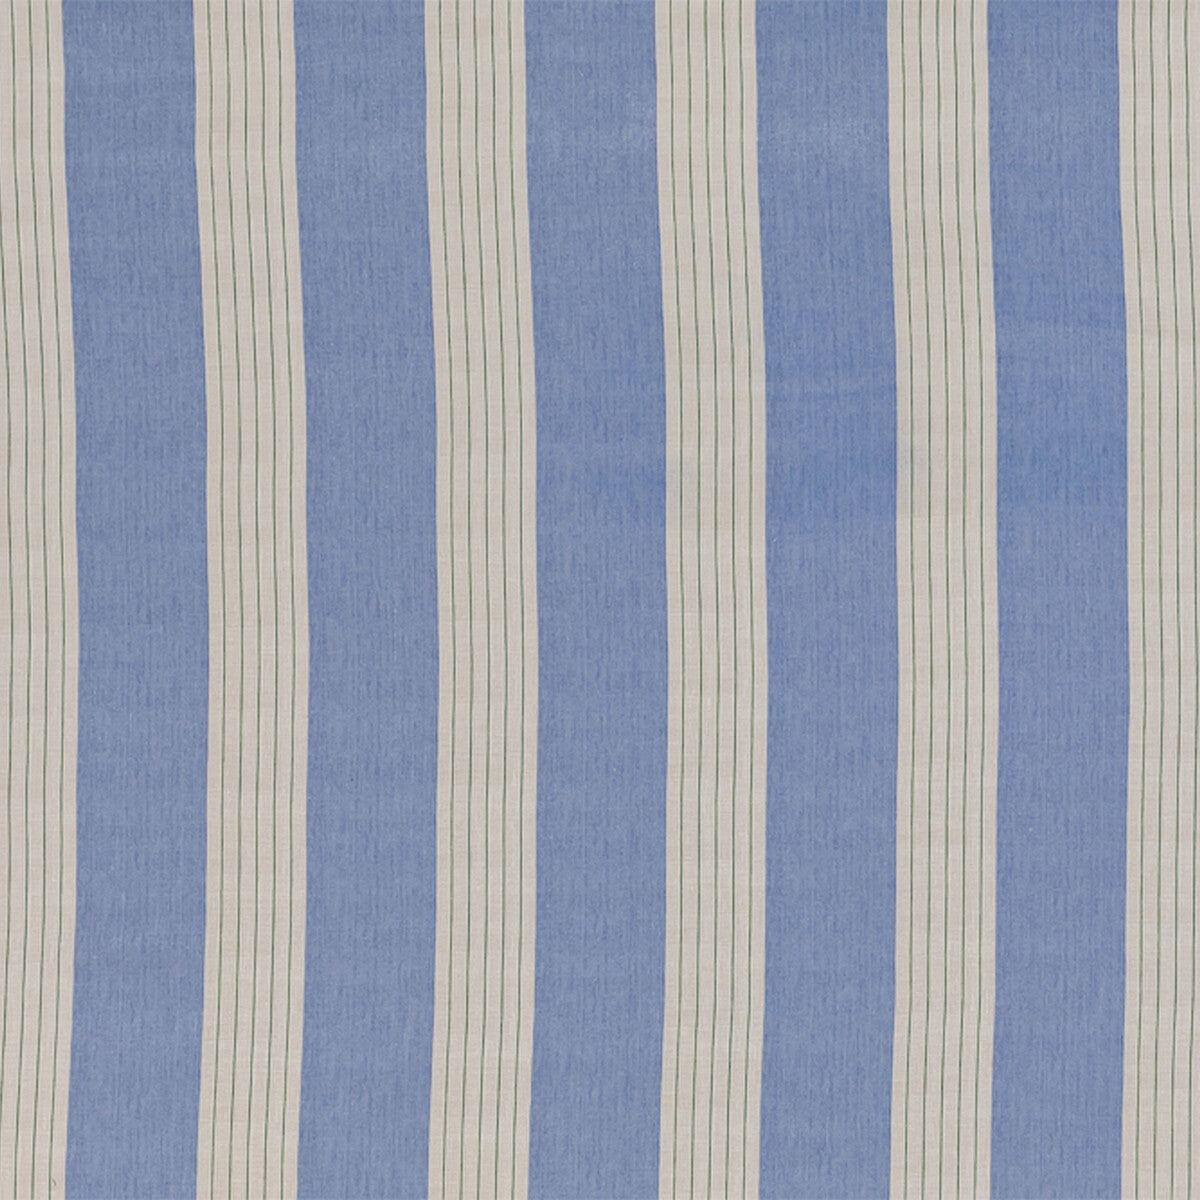 Lambert Stripe fabric in blue color - pattern BFC-3697.5.0 - by Lee Jofa in the Blithfield collection